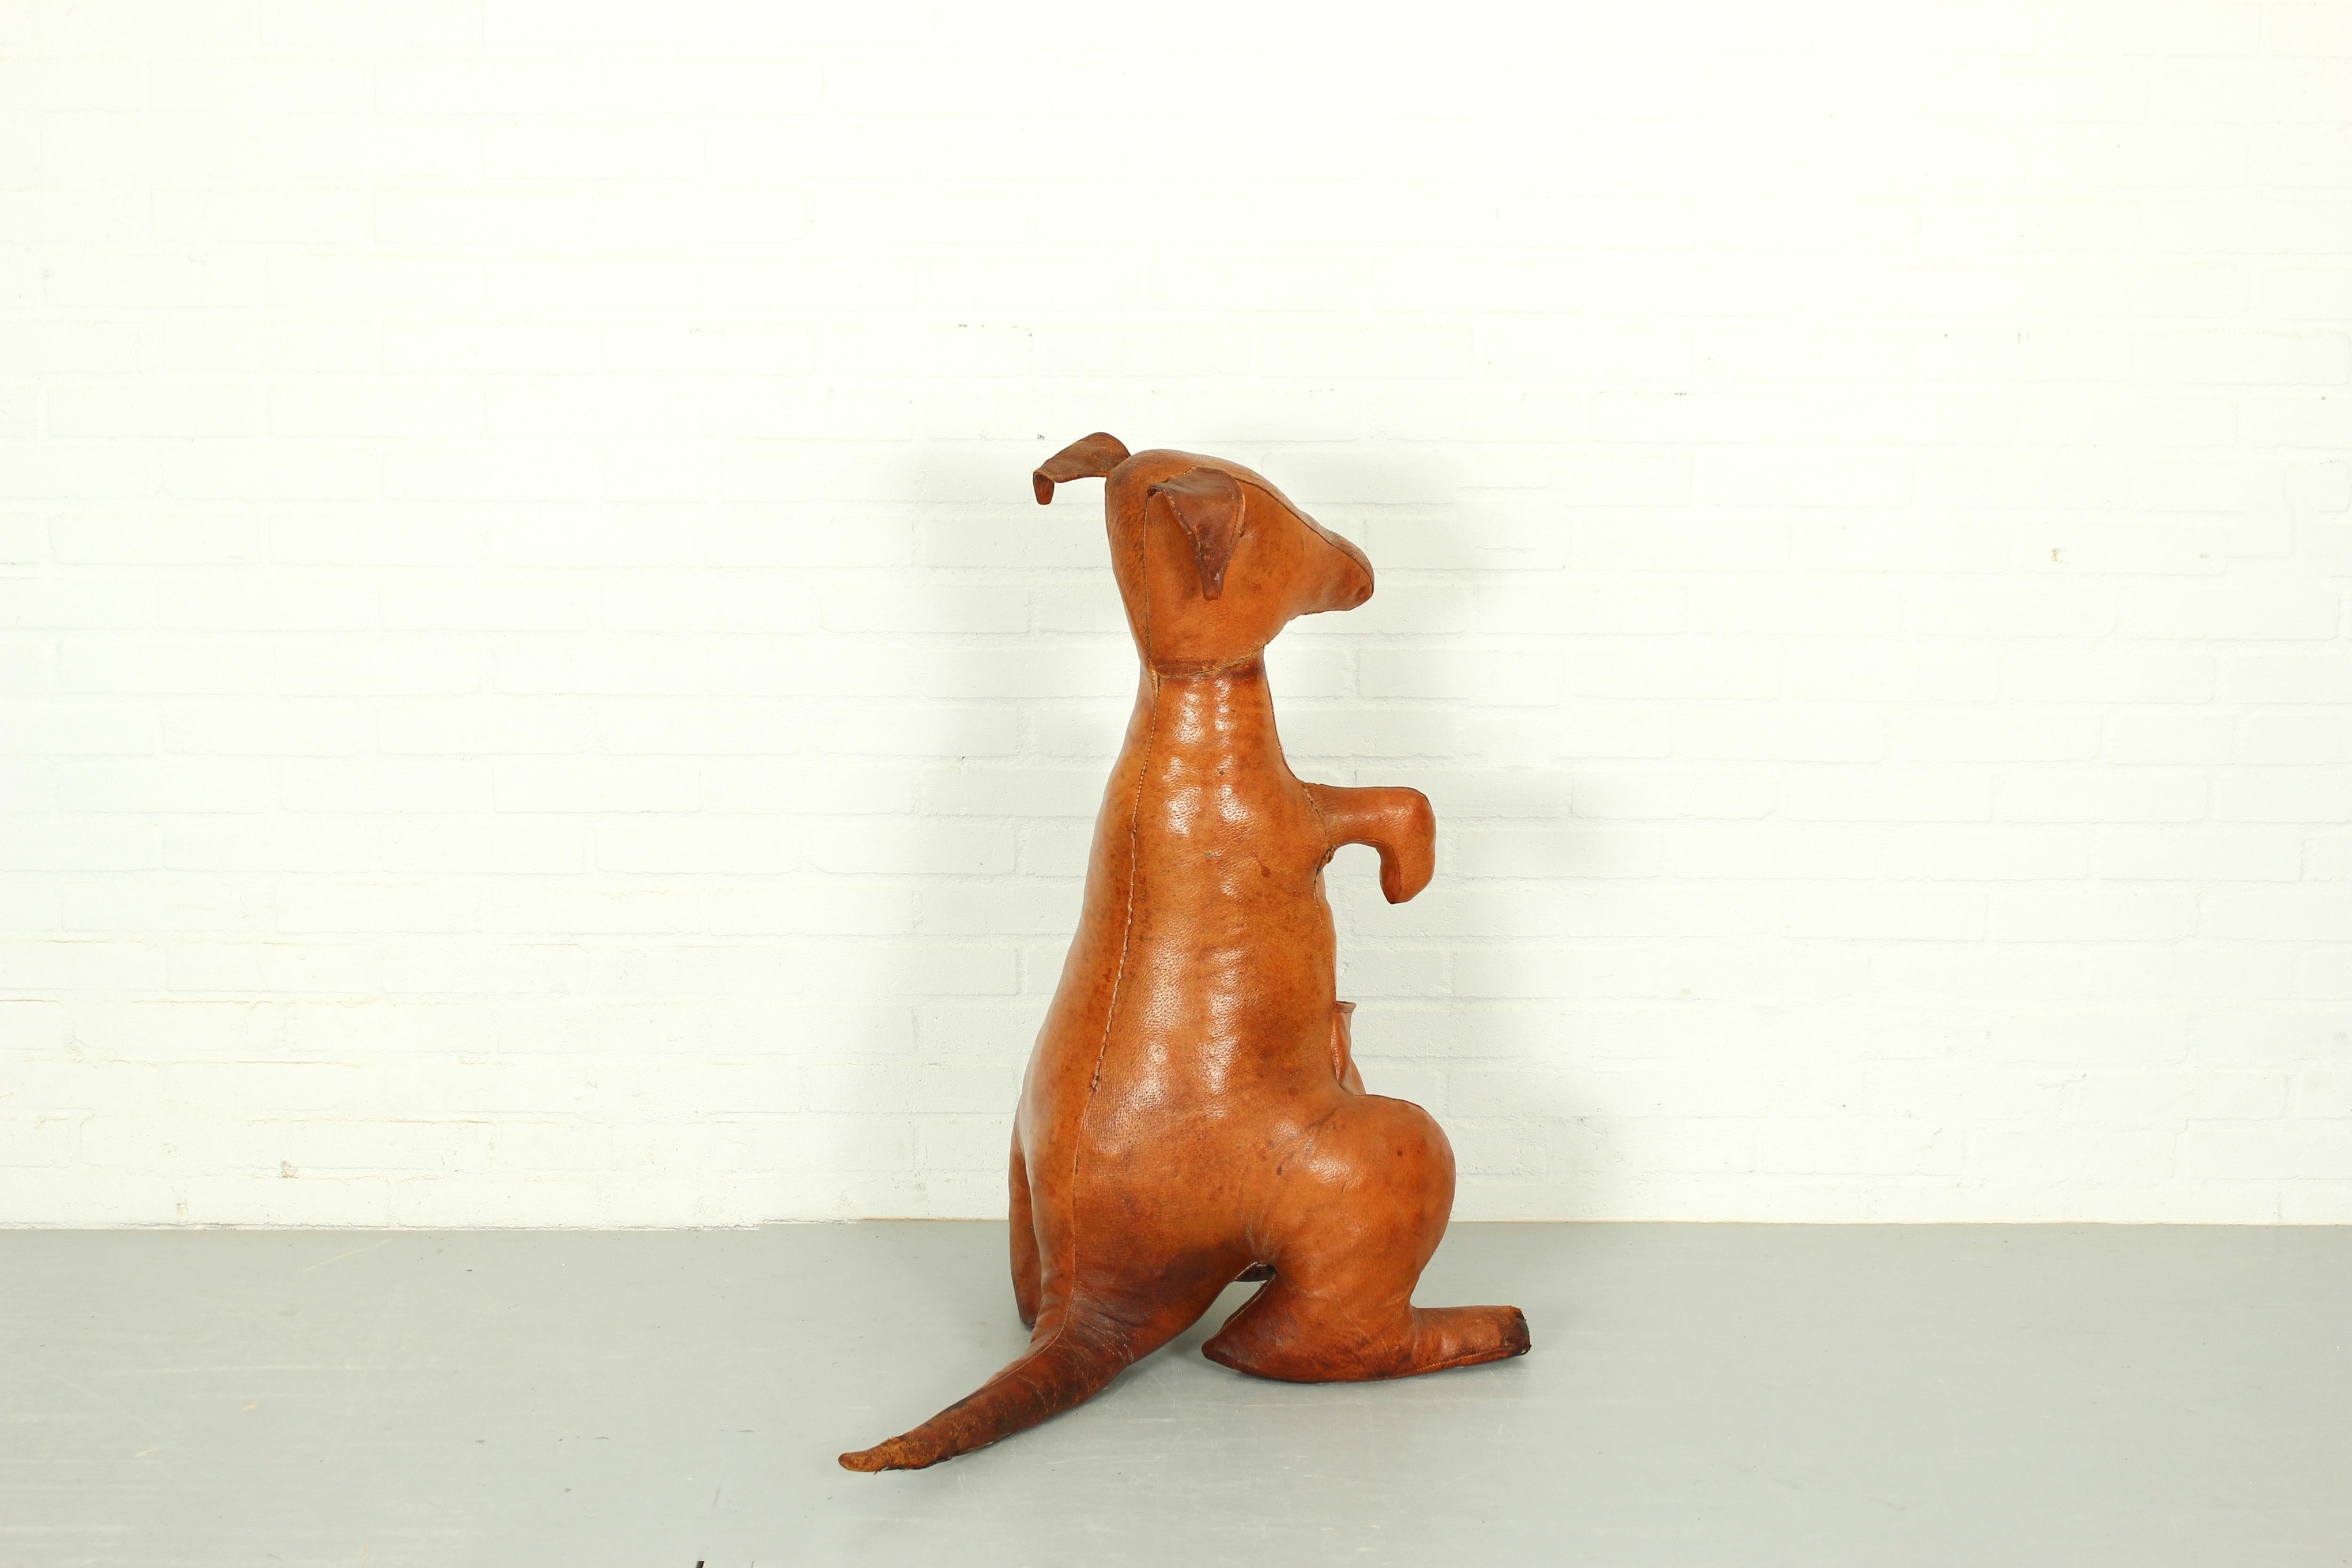 Leather Kangaroo Magazine Stand by Dimitri Omersa, England, 1960s For Sale 1